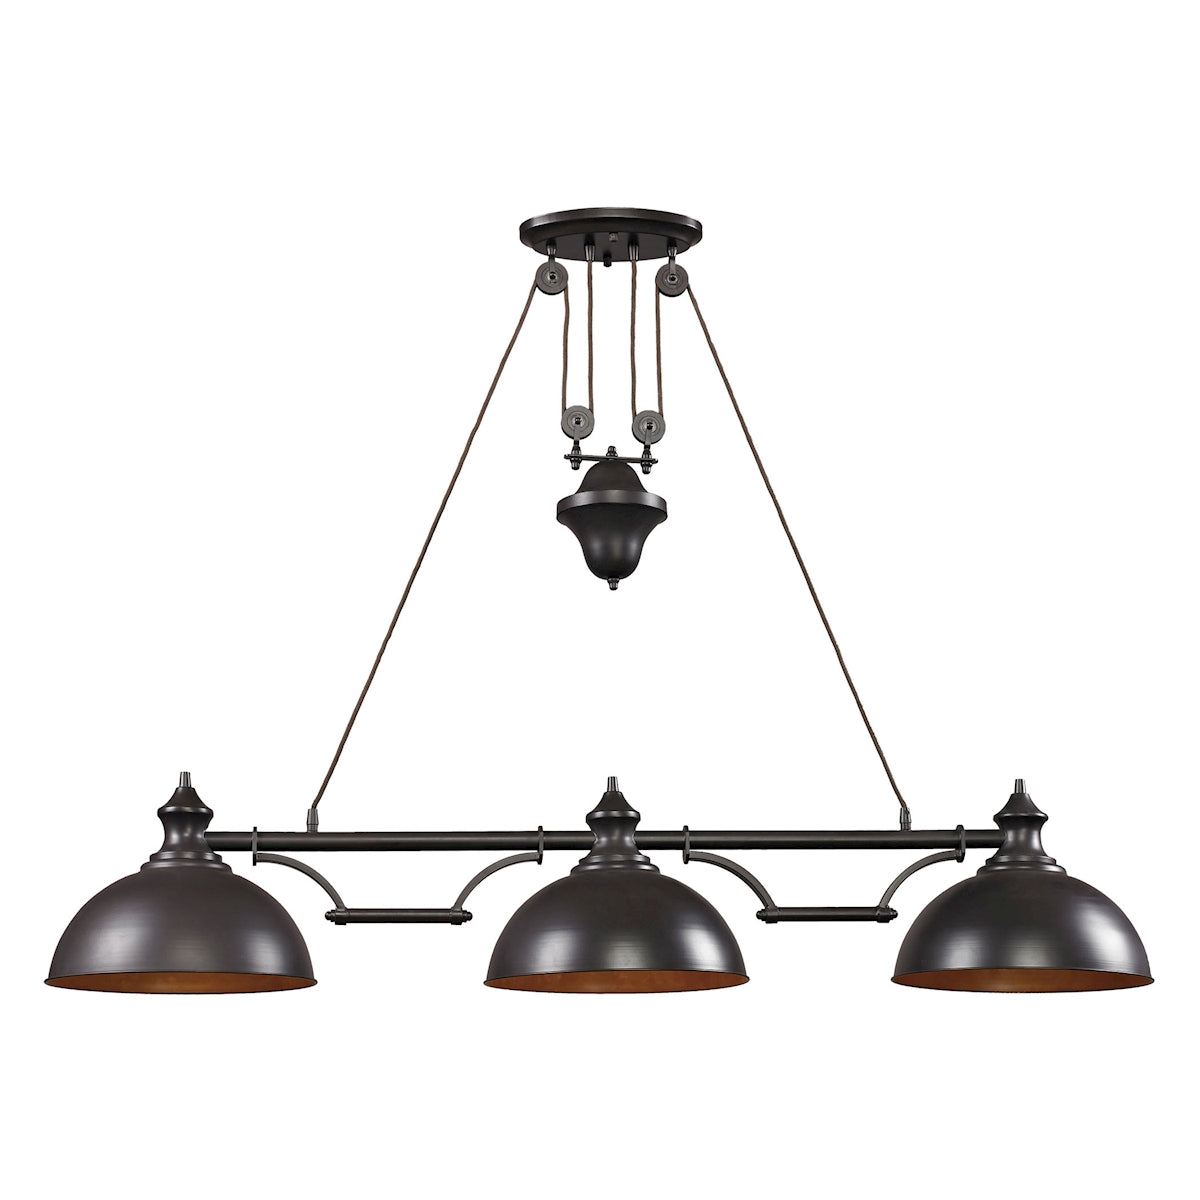 Farmhouse 3-Light Island Light in Oiled Bronze with Matching Shade